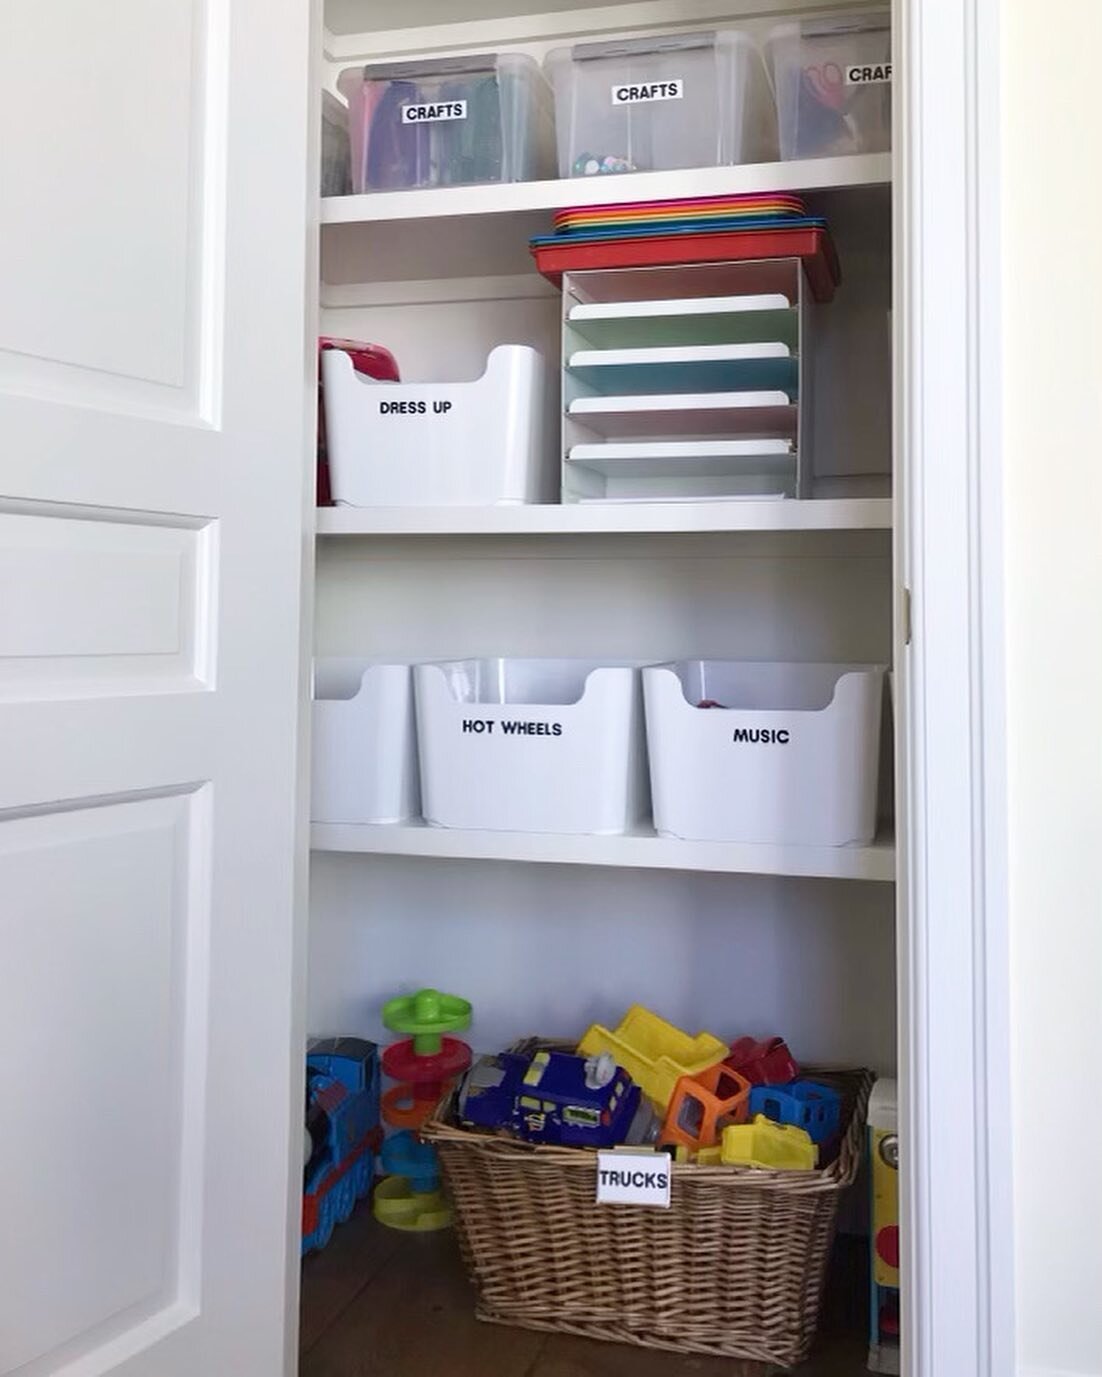 All play and no work in keeping these toys + crafts organized! 
.
.
#closet #playroomcloset #organizedtoys #organizedhome #crafts #allplaynowork #crosswellorganizing